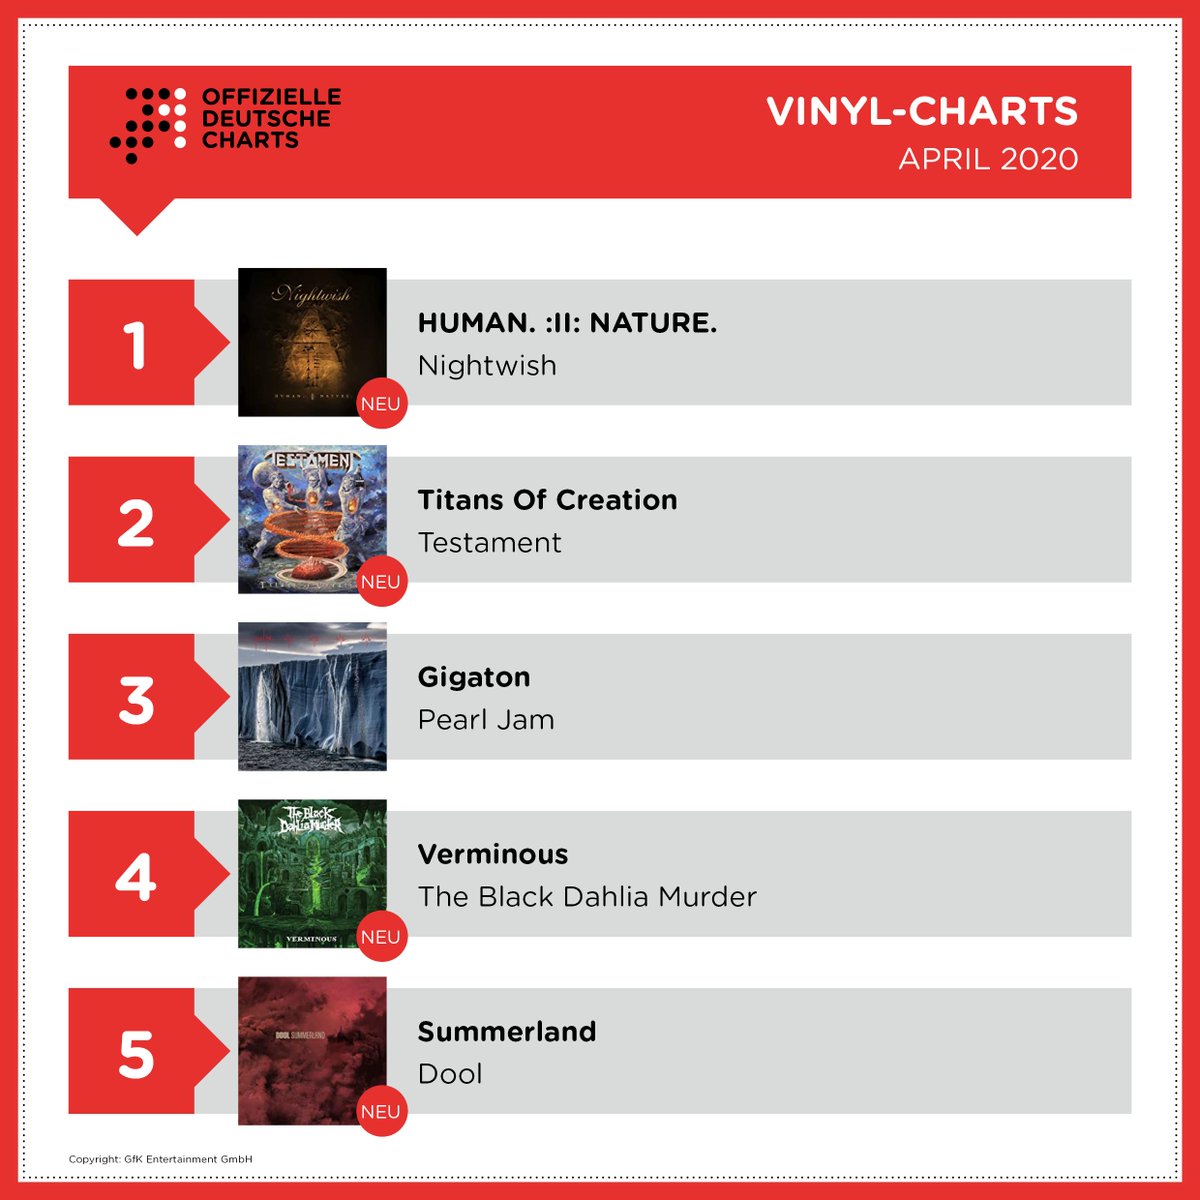 No less than six metal bands are entering this month's Official German Vinyl Chart. Please welcome @NightwishBand (#1), @testament (#2), @bdmmetal (#4), @CirithU (#8), @officialhsb (#14) and @TriviumOfficial (#18). The complete list can be found here: https://www.offiziellecharts.de/charts/vinyl pic.twitter.com/os5WRDaH9g | Cirith Ungol Online